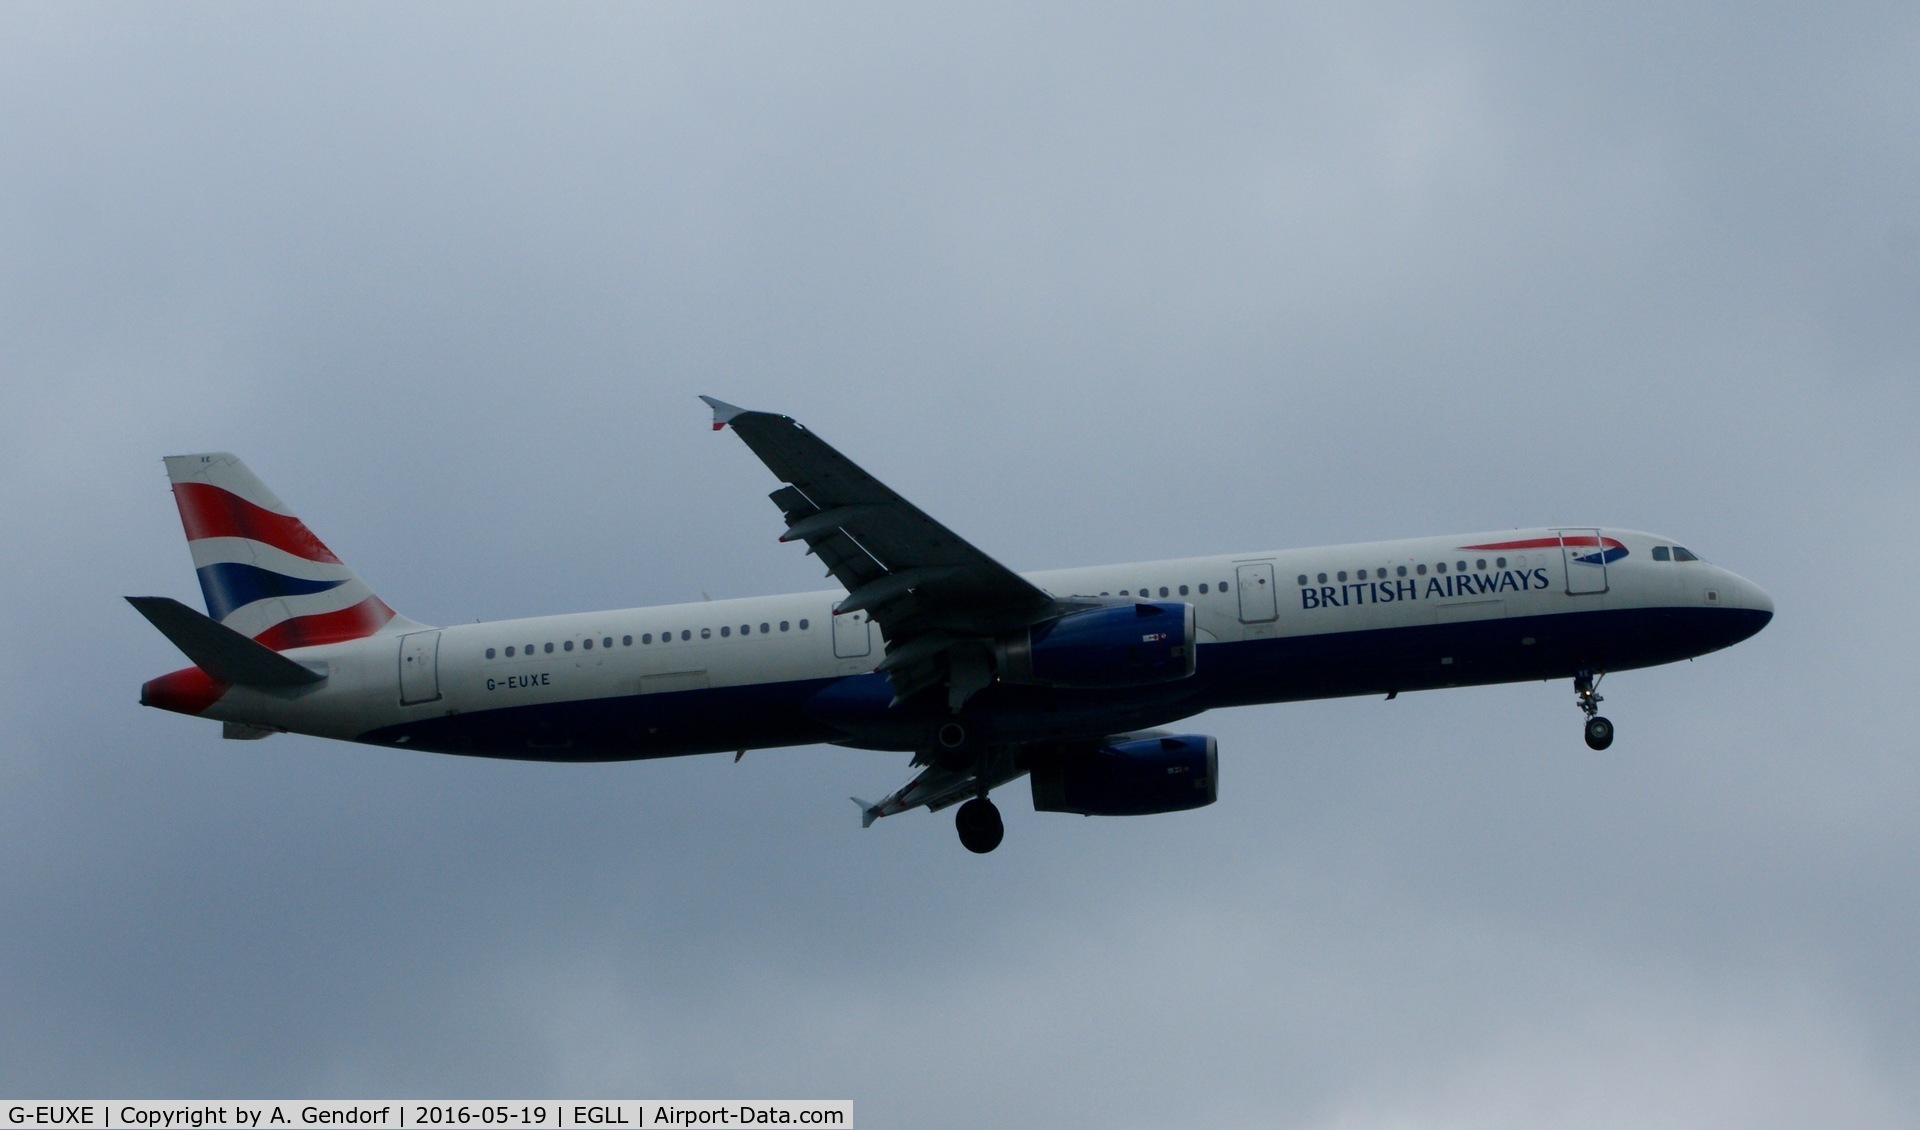 G-EUXE, 2004 Airbus A321-231 C/N 2323, British Airways, is here on short finals RWY 27R at London Heathrow(EGLL)